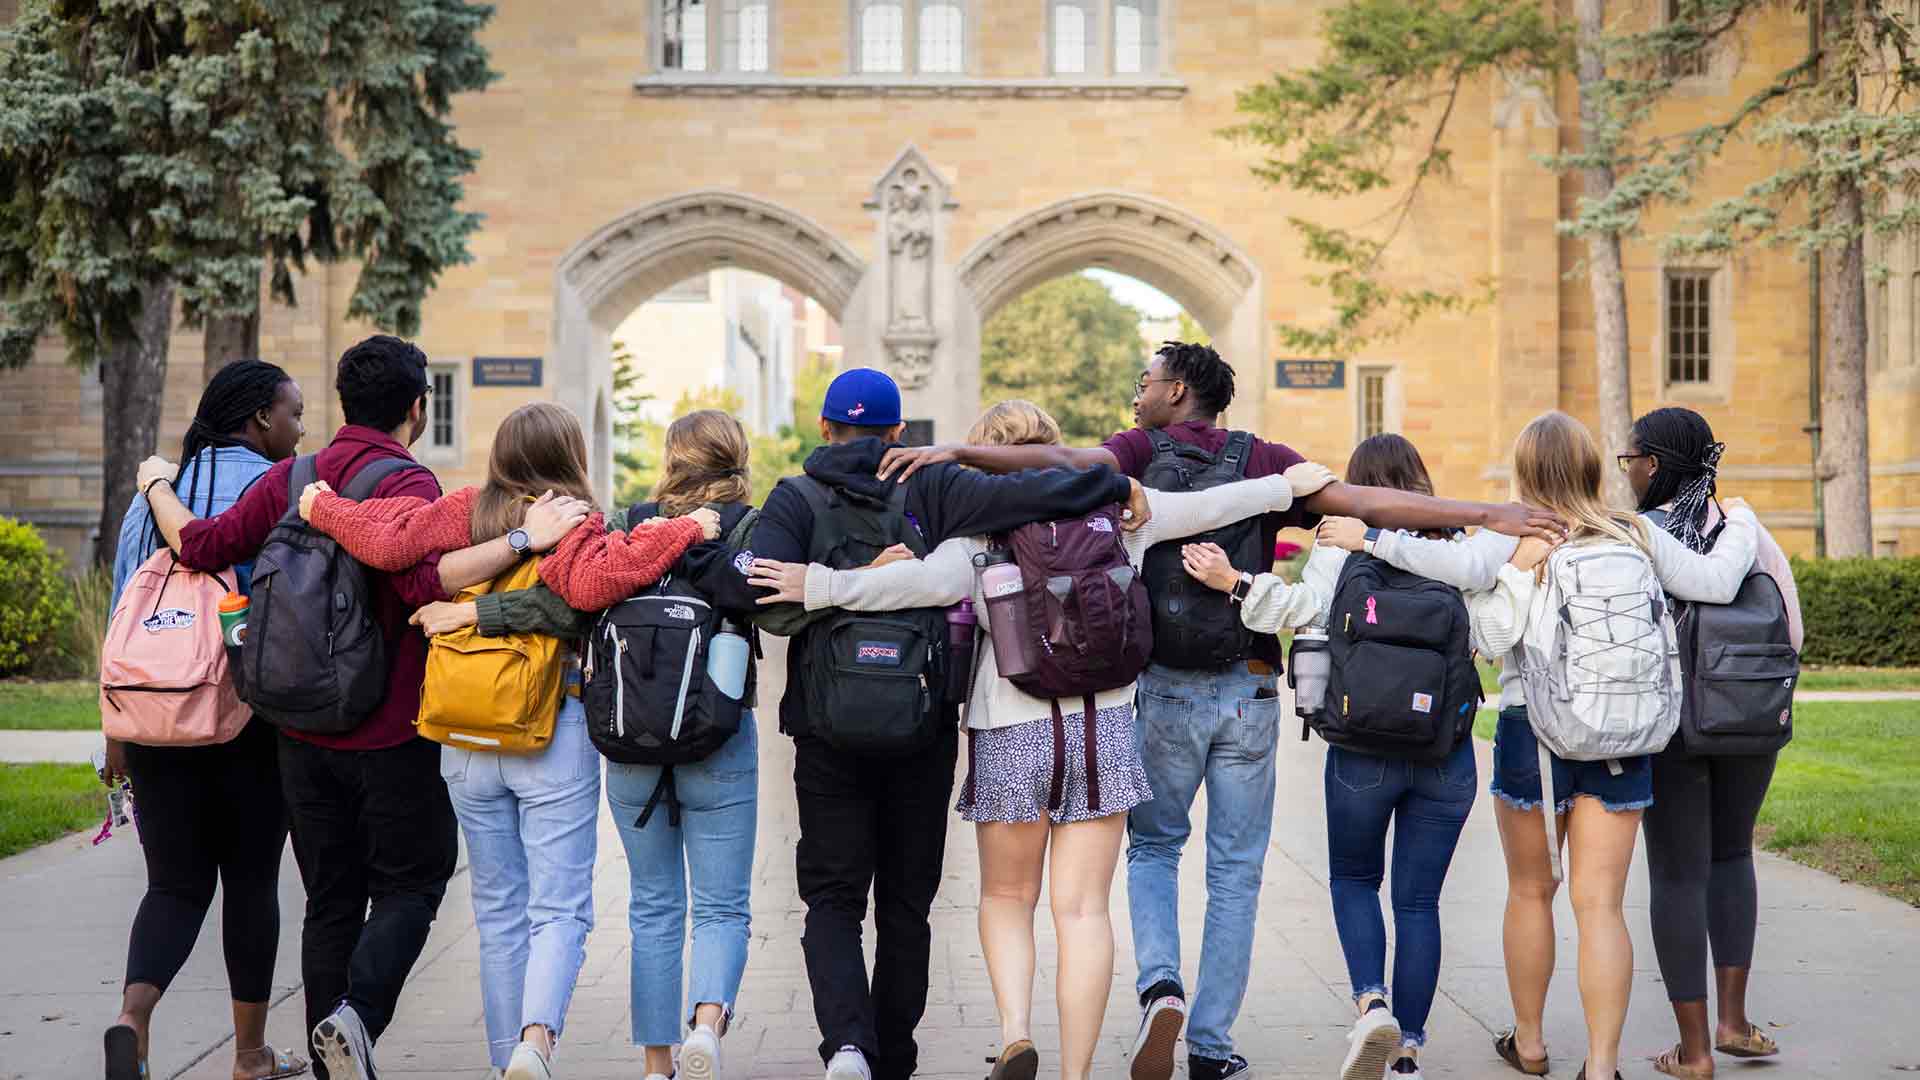 Students embracing and walking toward arches